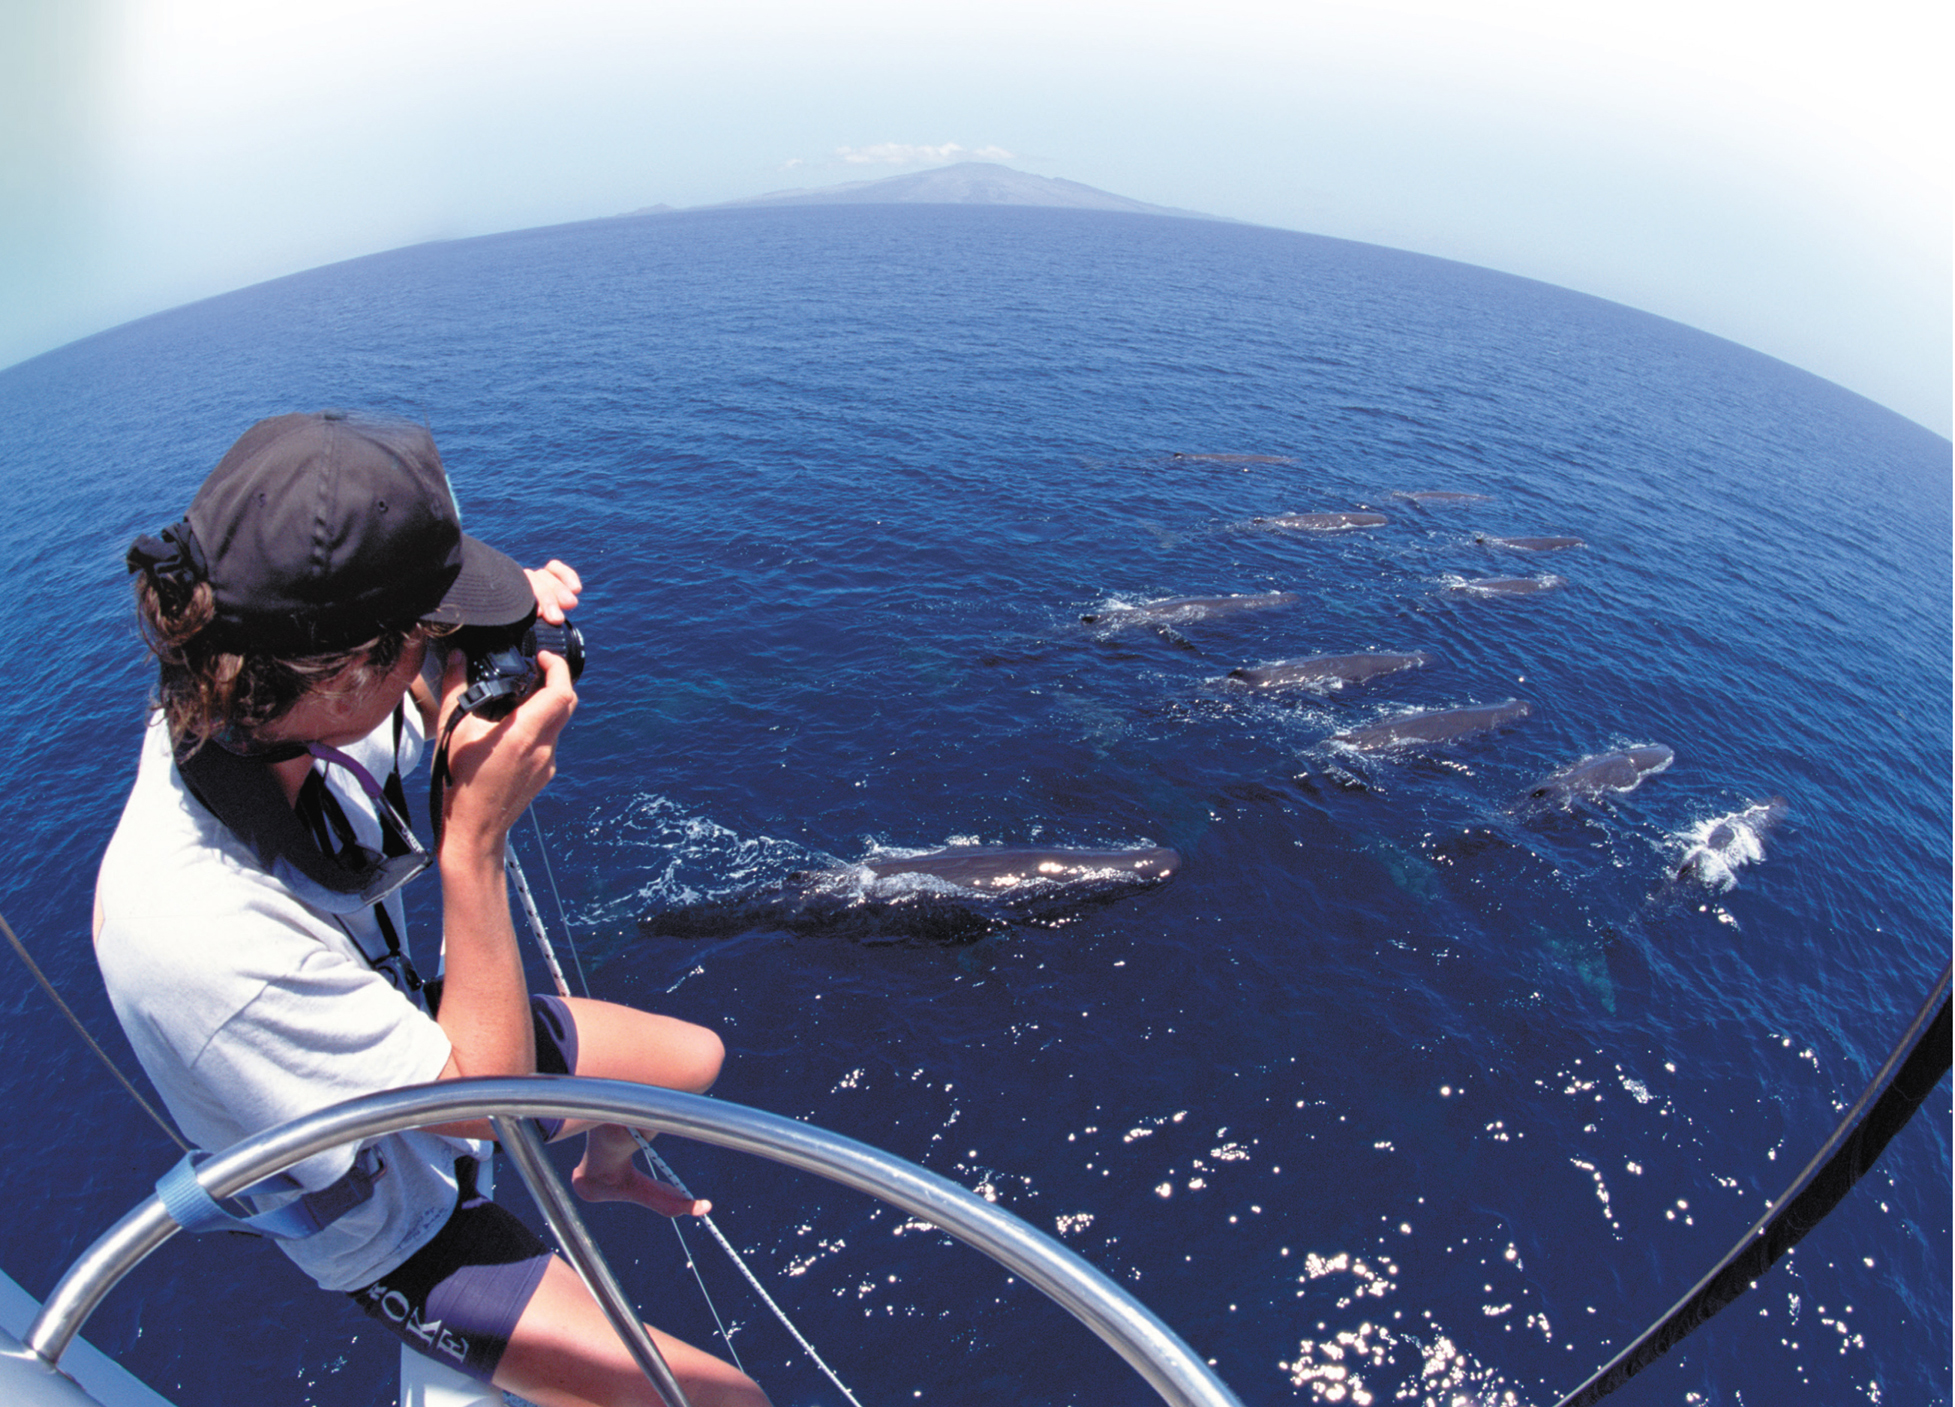 A scientist photographs whales swimming in the ocean.